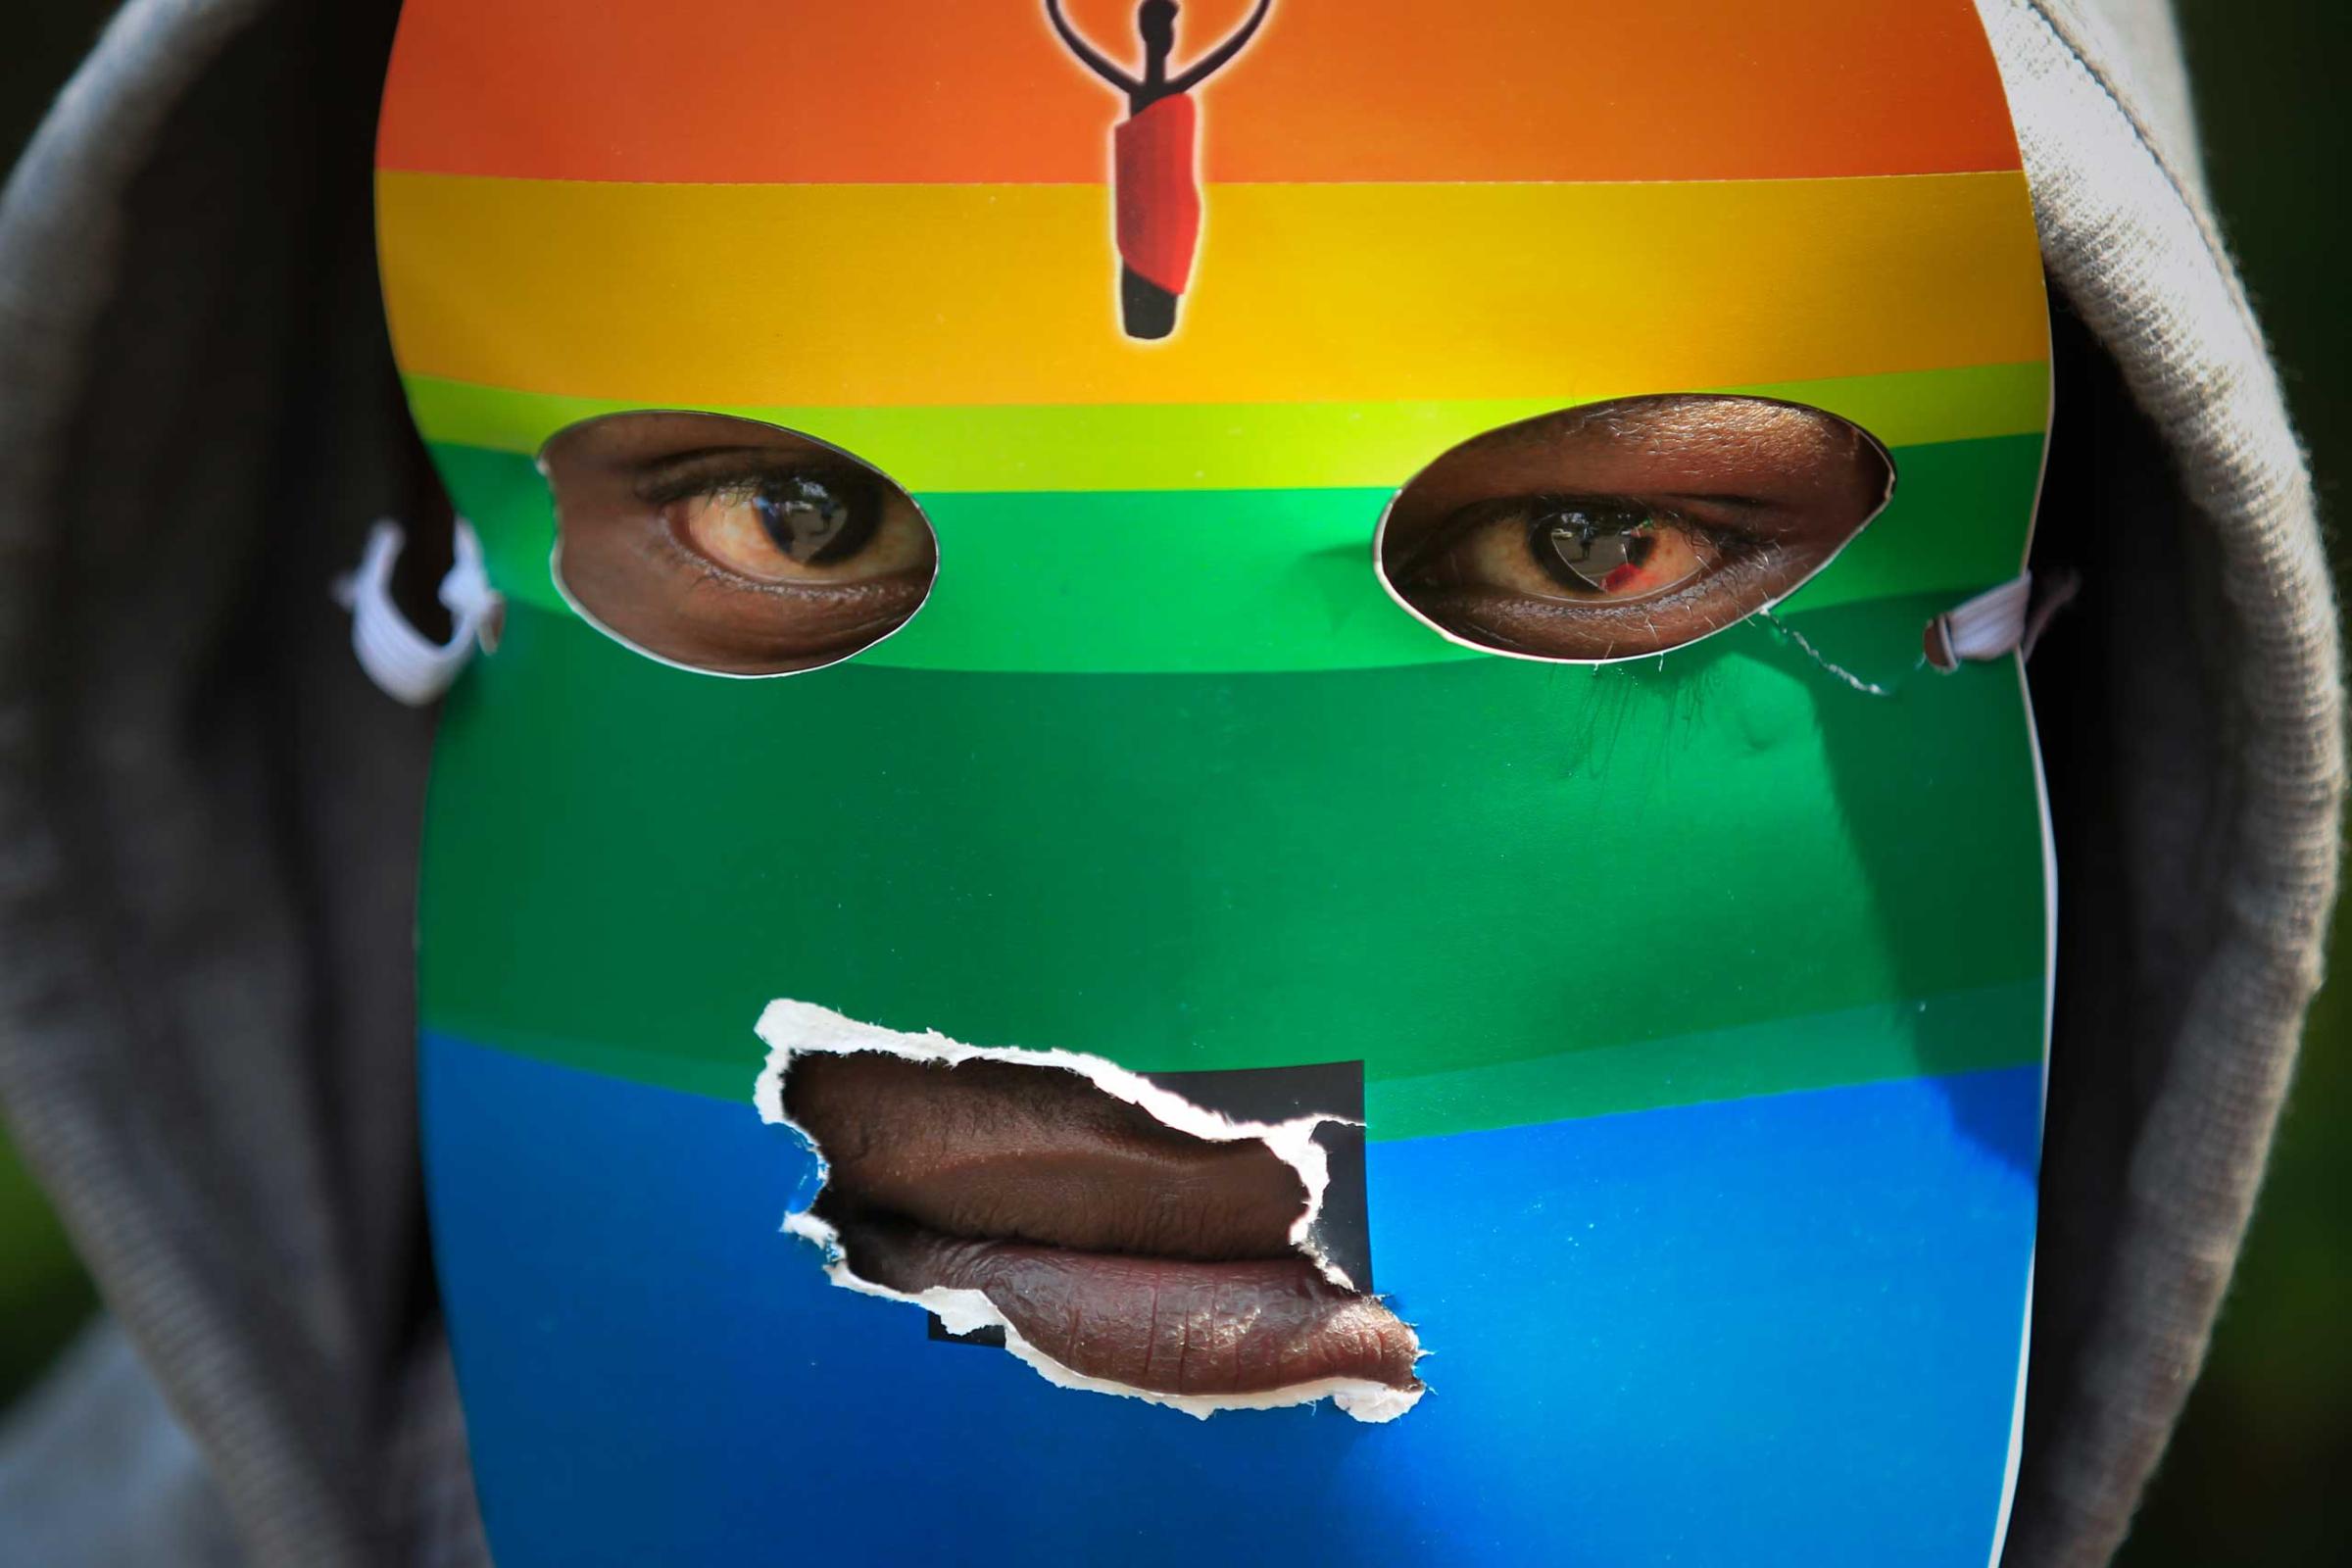 A masked Kenyan supporter of the LGBT community joins others during a protest against Uganda's anti-gay bill in front of the Ugandan High Commission in Nairobi, Kenya, Feb. 10, 2014.